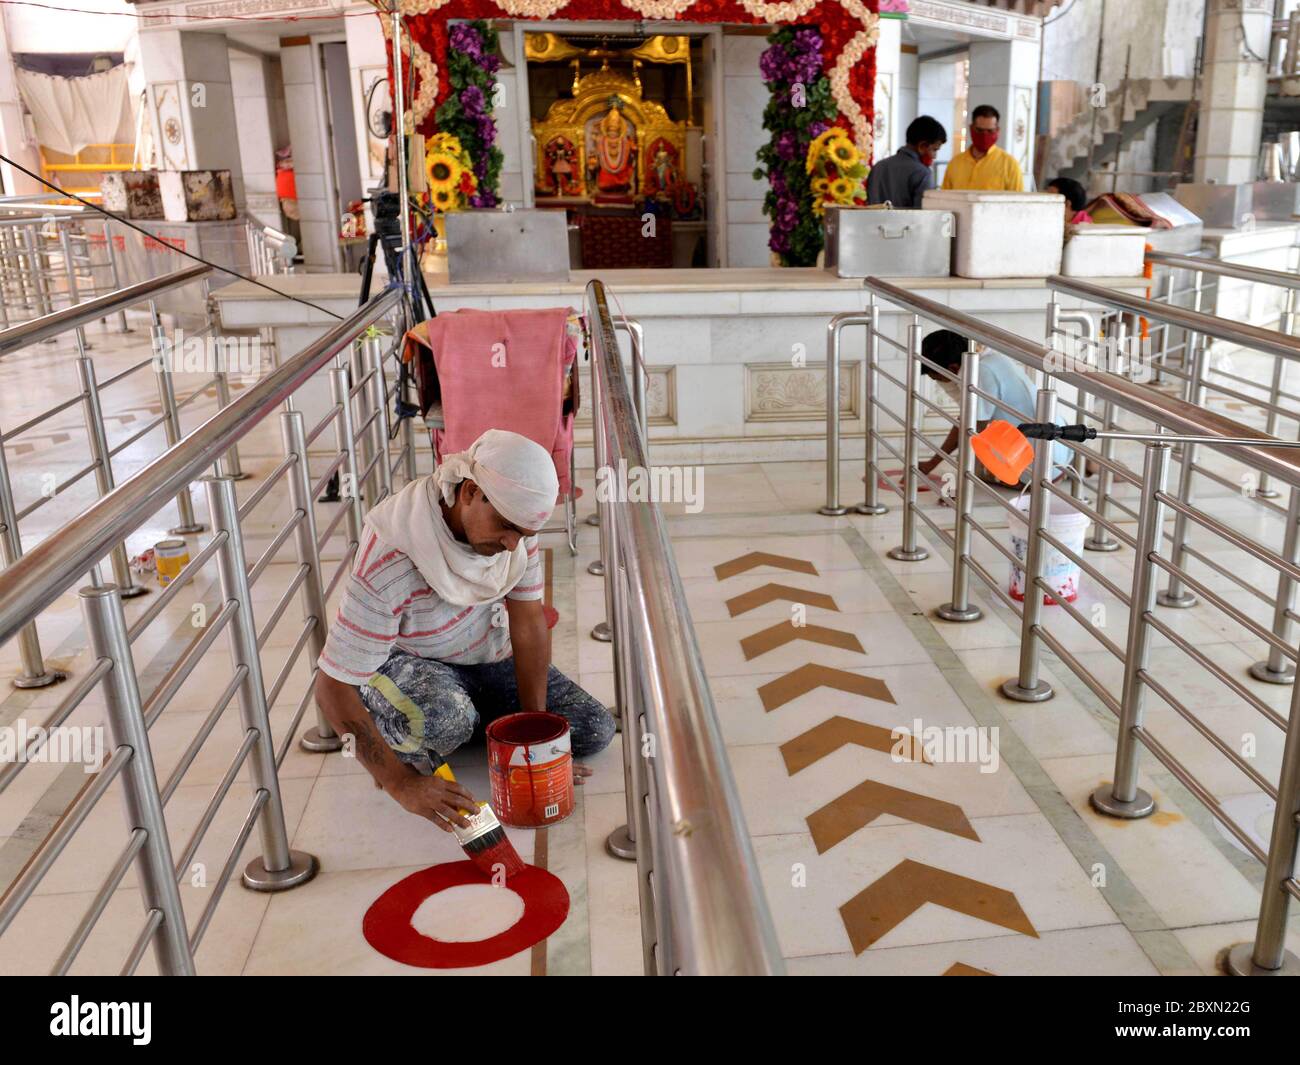 (200608) -- NEW DELHI, June 8, 2020 (Xinhua) -- Workers draw social-distancing markers at the entrance of a temple in New Delhi, India, June 6, 2020. People thronged into places of worship like temples, mosques, churches, and gurudwaras (for Sikh community) in India on Monday as religious places reopened across many states after 76 days of lockdown due to COVID-19. The reopening of religious places was permitted by fresh guidelines issued by the federal government on June 4, which stated "Religious places or places of worship for public in containment zones shall remain closed. Only those Stock Photo